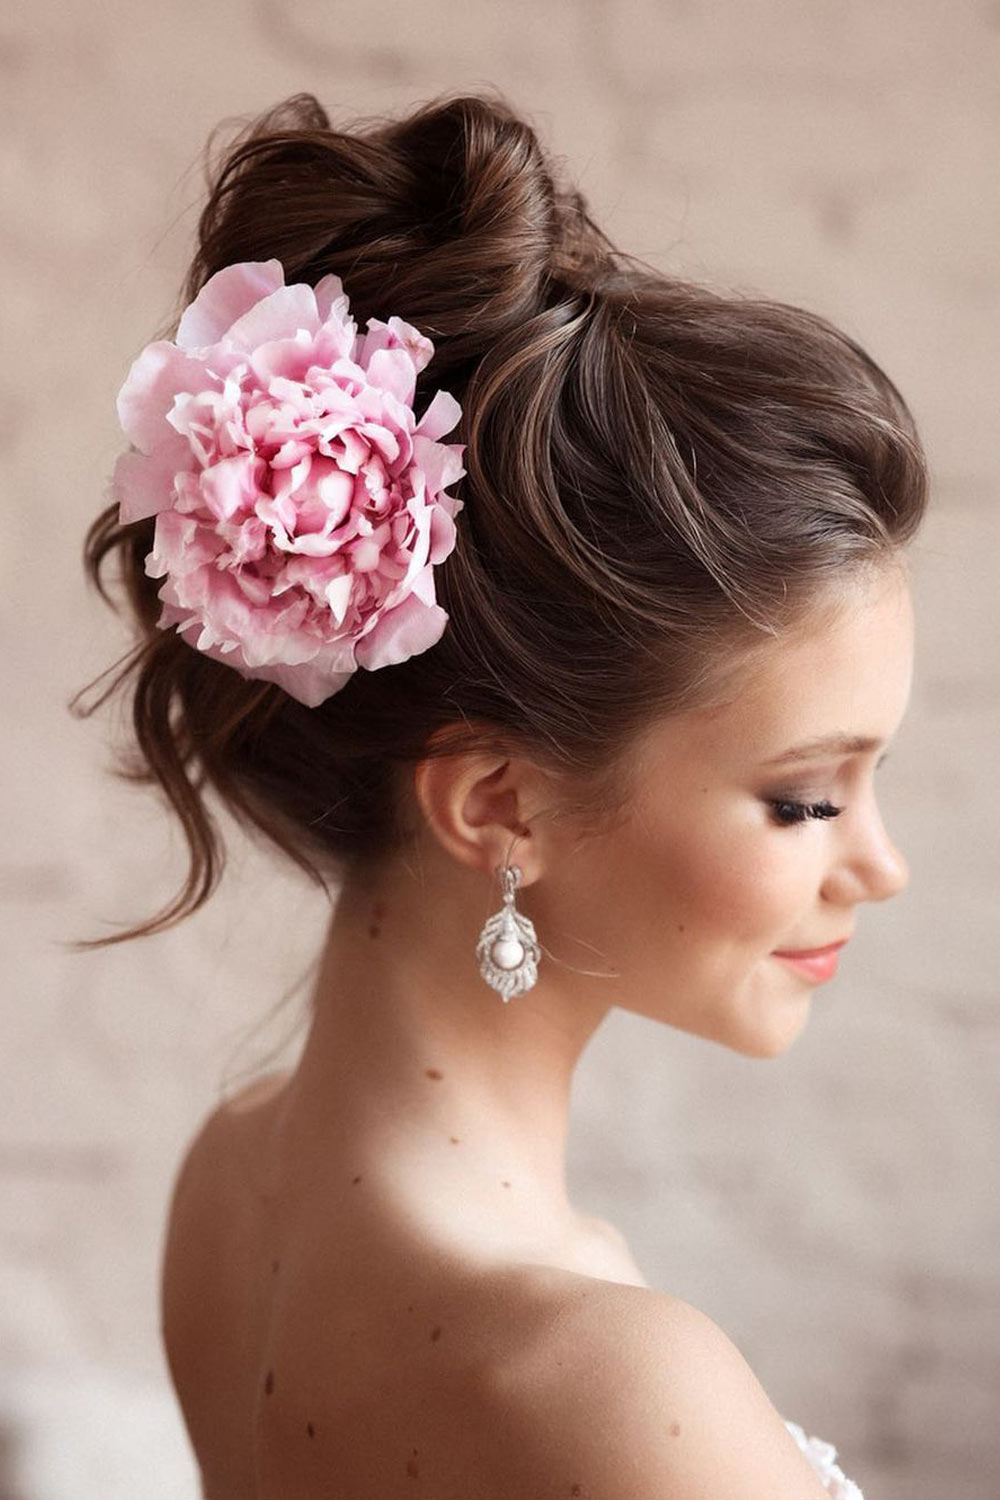 Top Knot with Flower